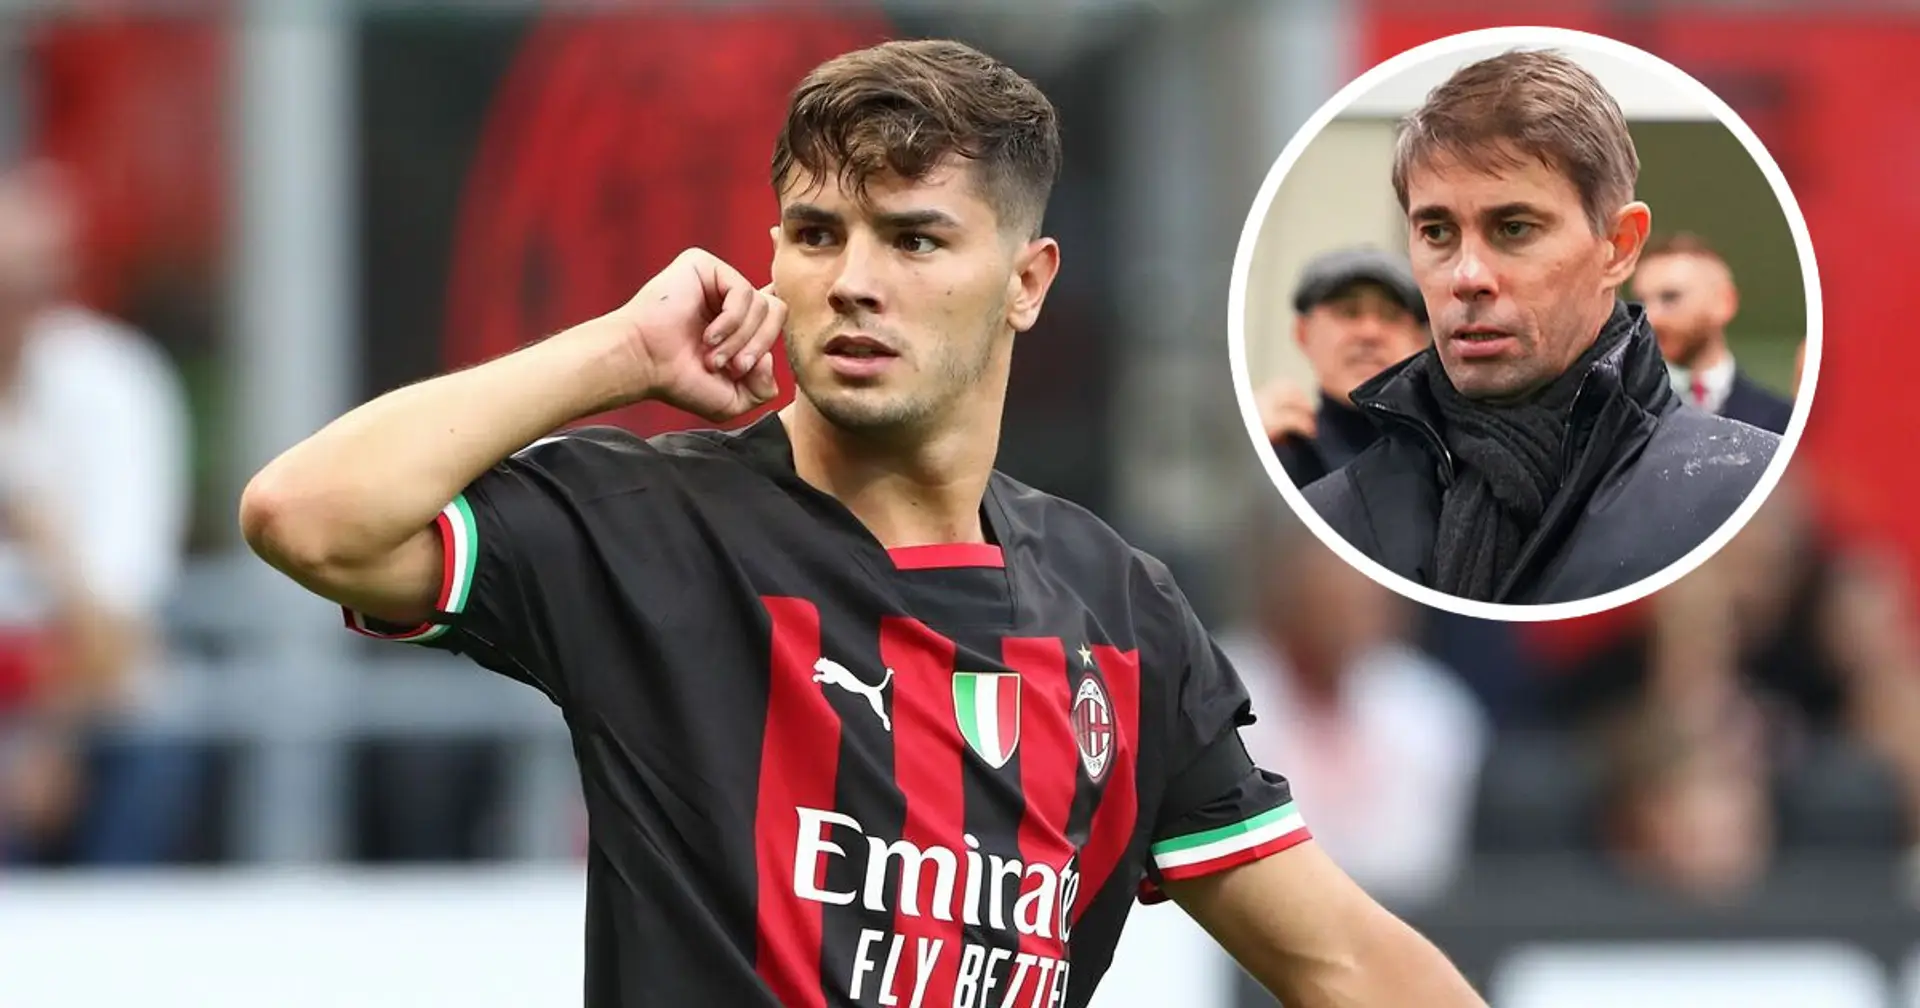 Milan director confirms intention to negotiate permanent Brahim Diaz move with Madrid